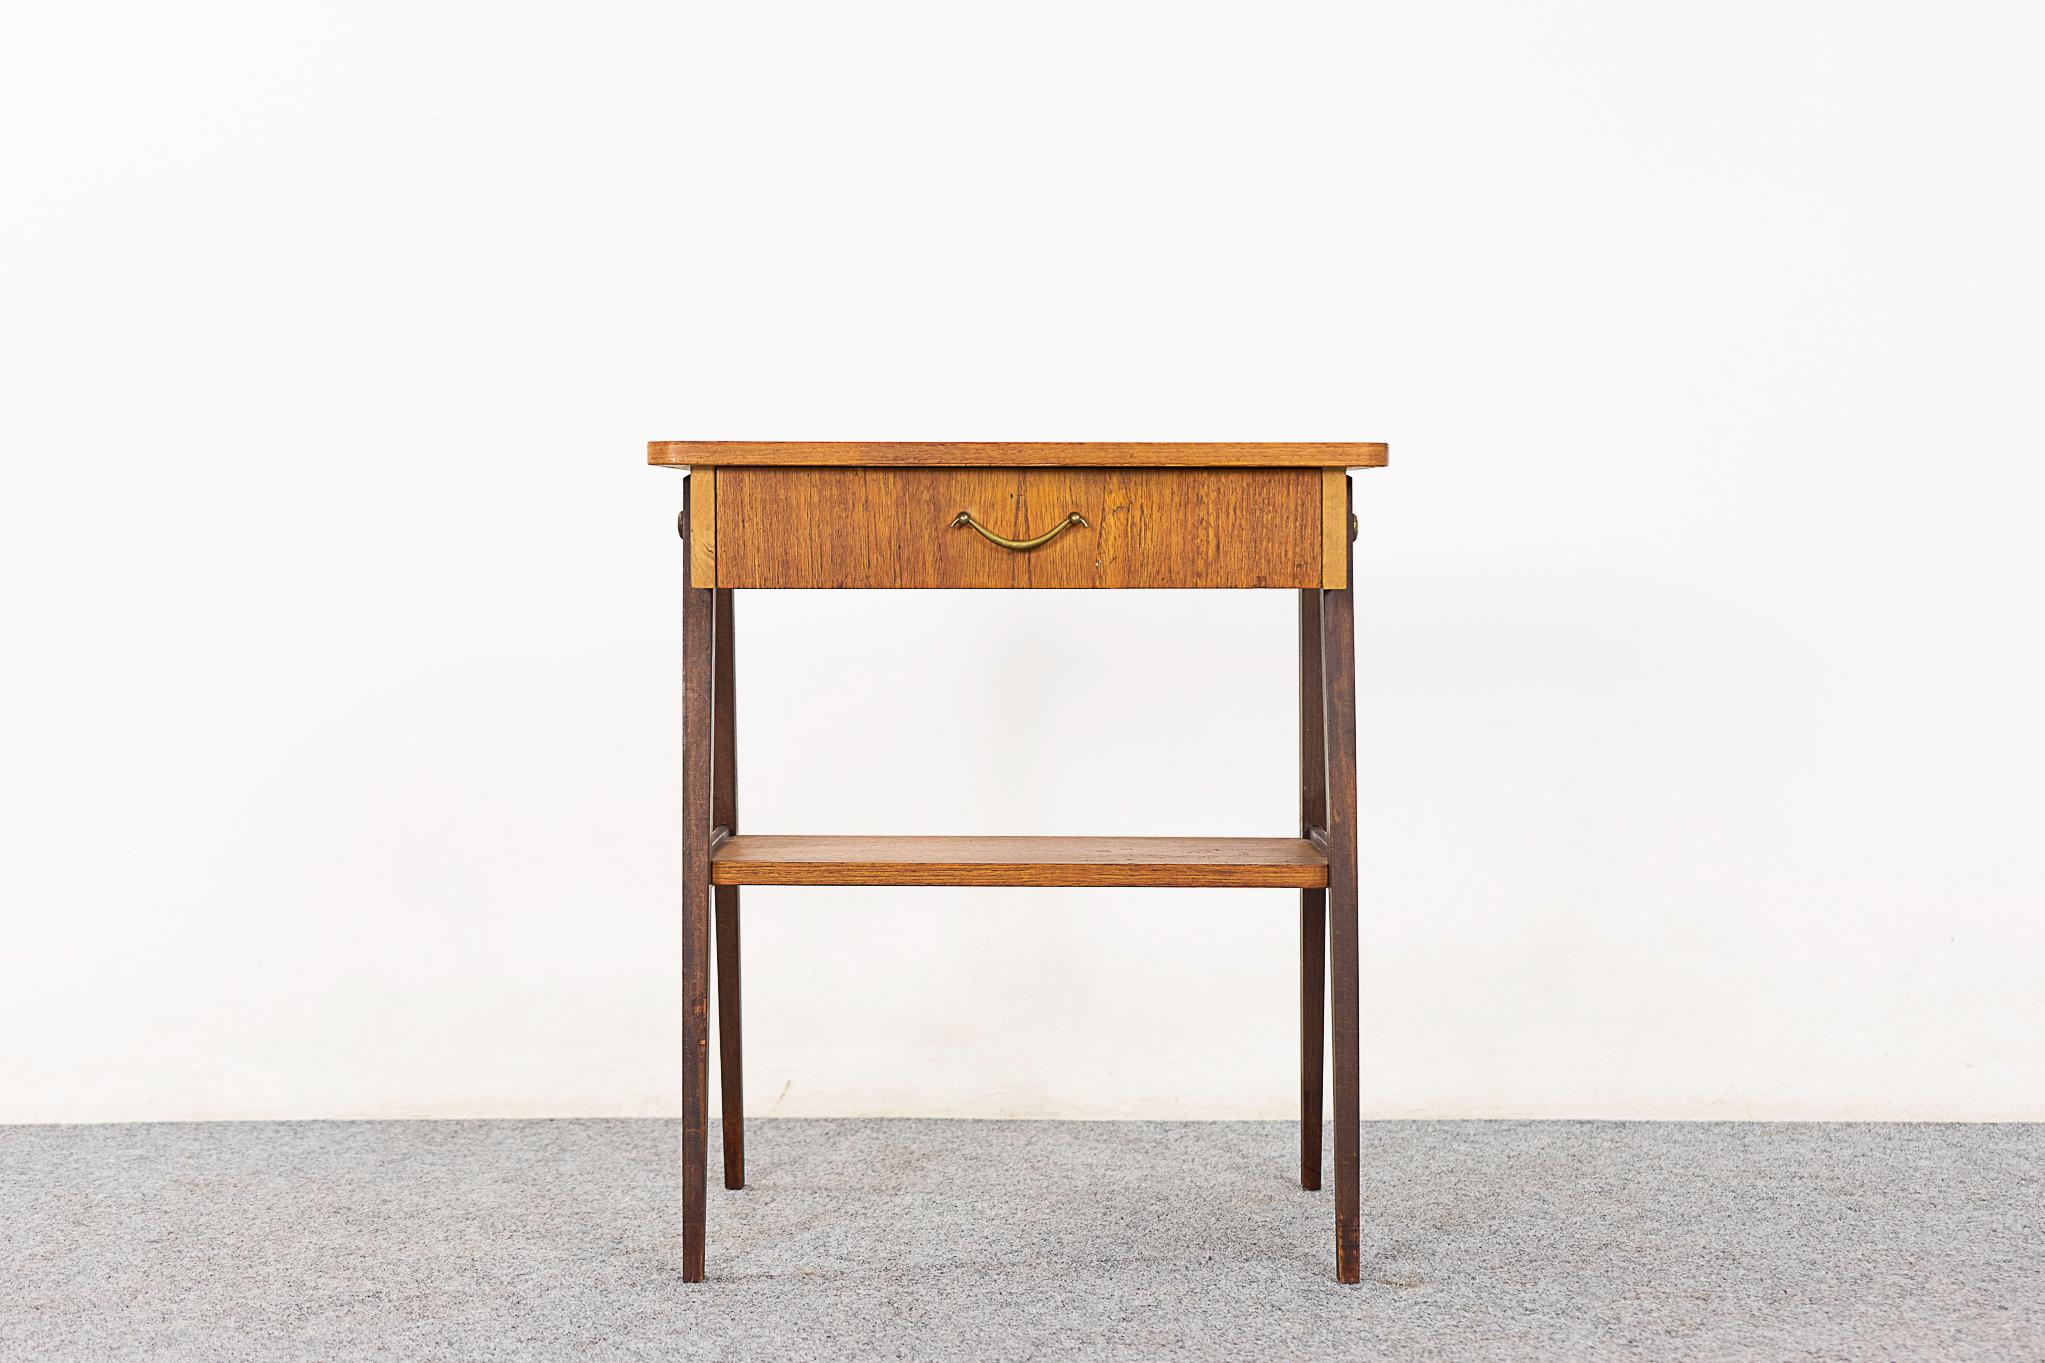 Teak mid-century bedside table, circa 1960's. Veneer case with contrasting splayed legs. Sleek dovetailed drawer and handy shelf! 

Please inquire for remote and international shipping rates.